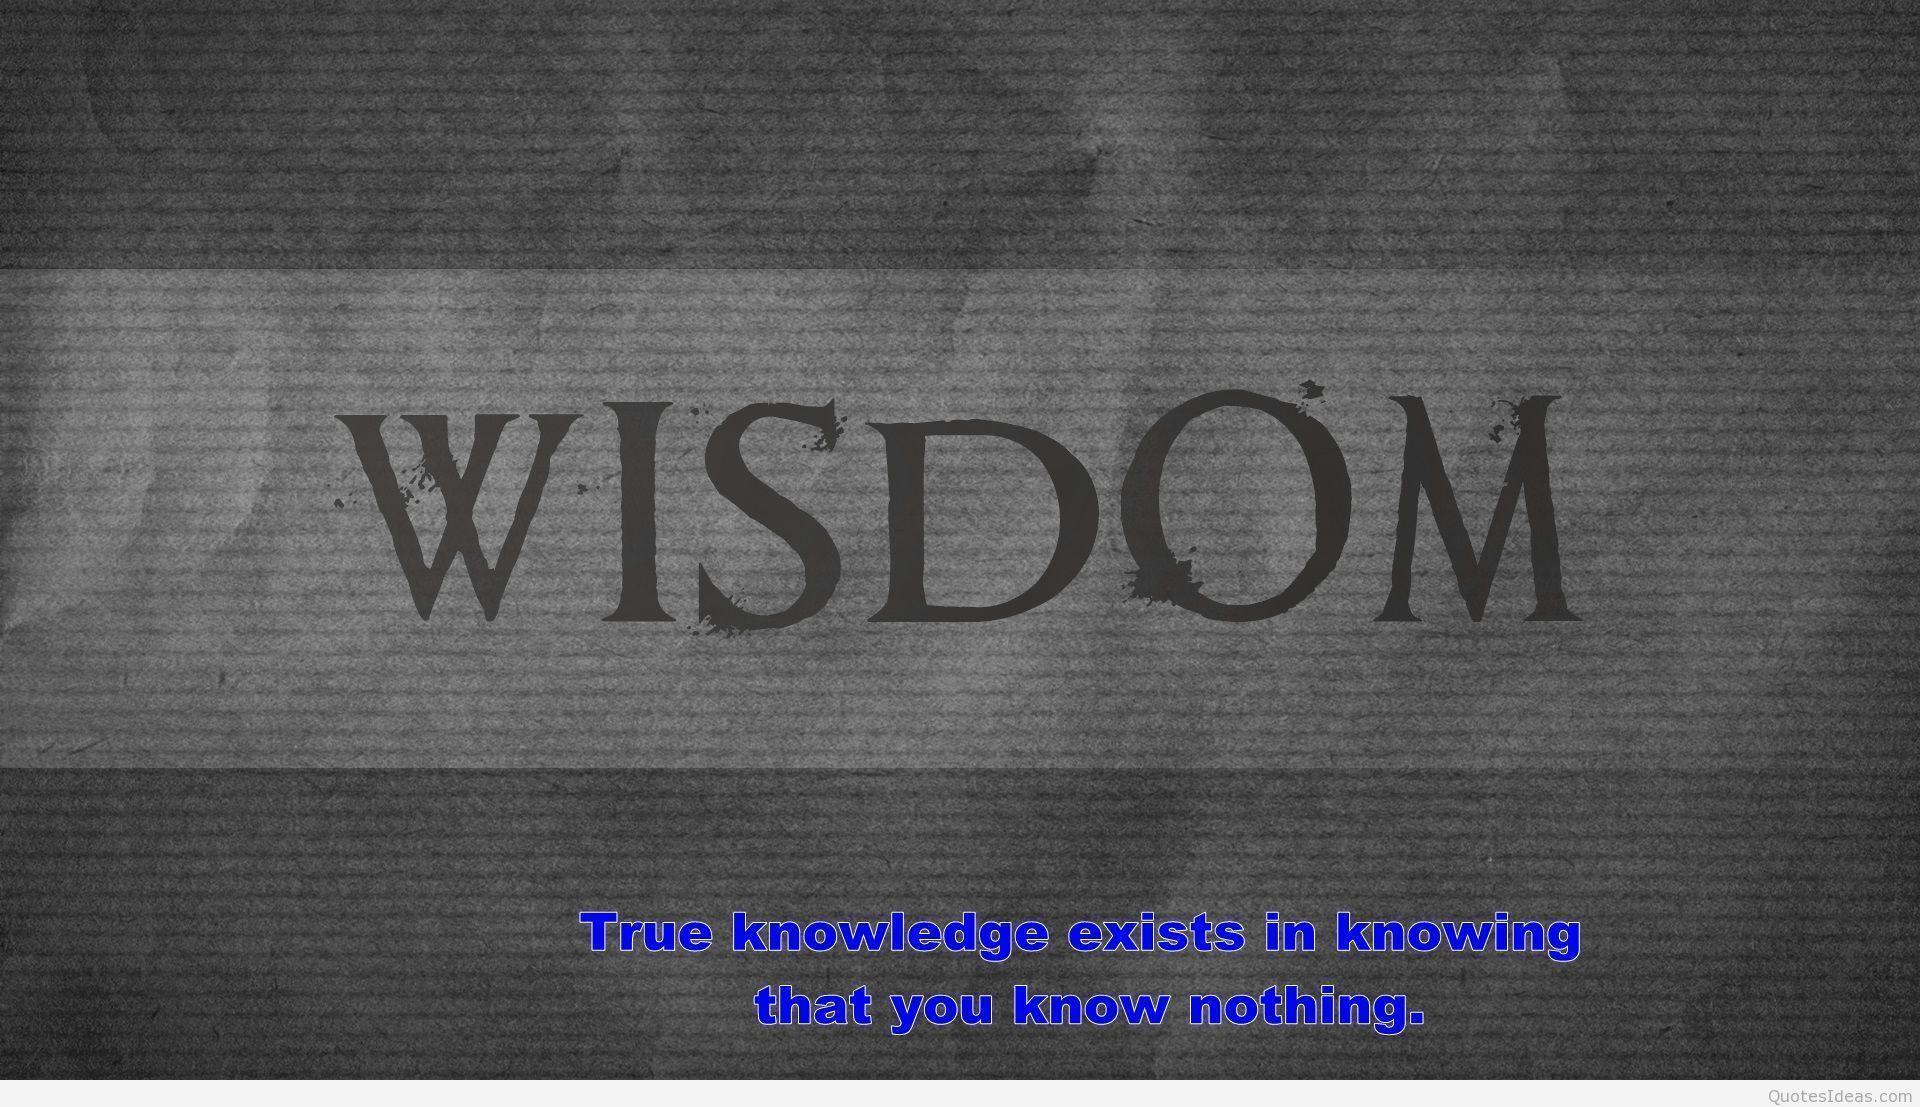 Wisdom quotes wallpaper and wise quotes